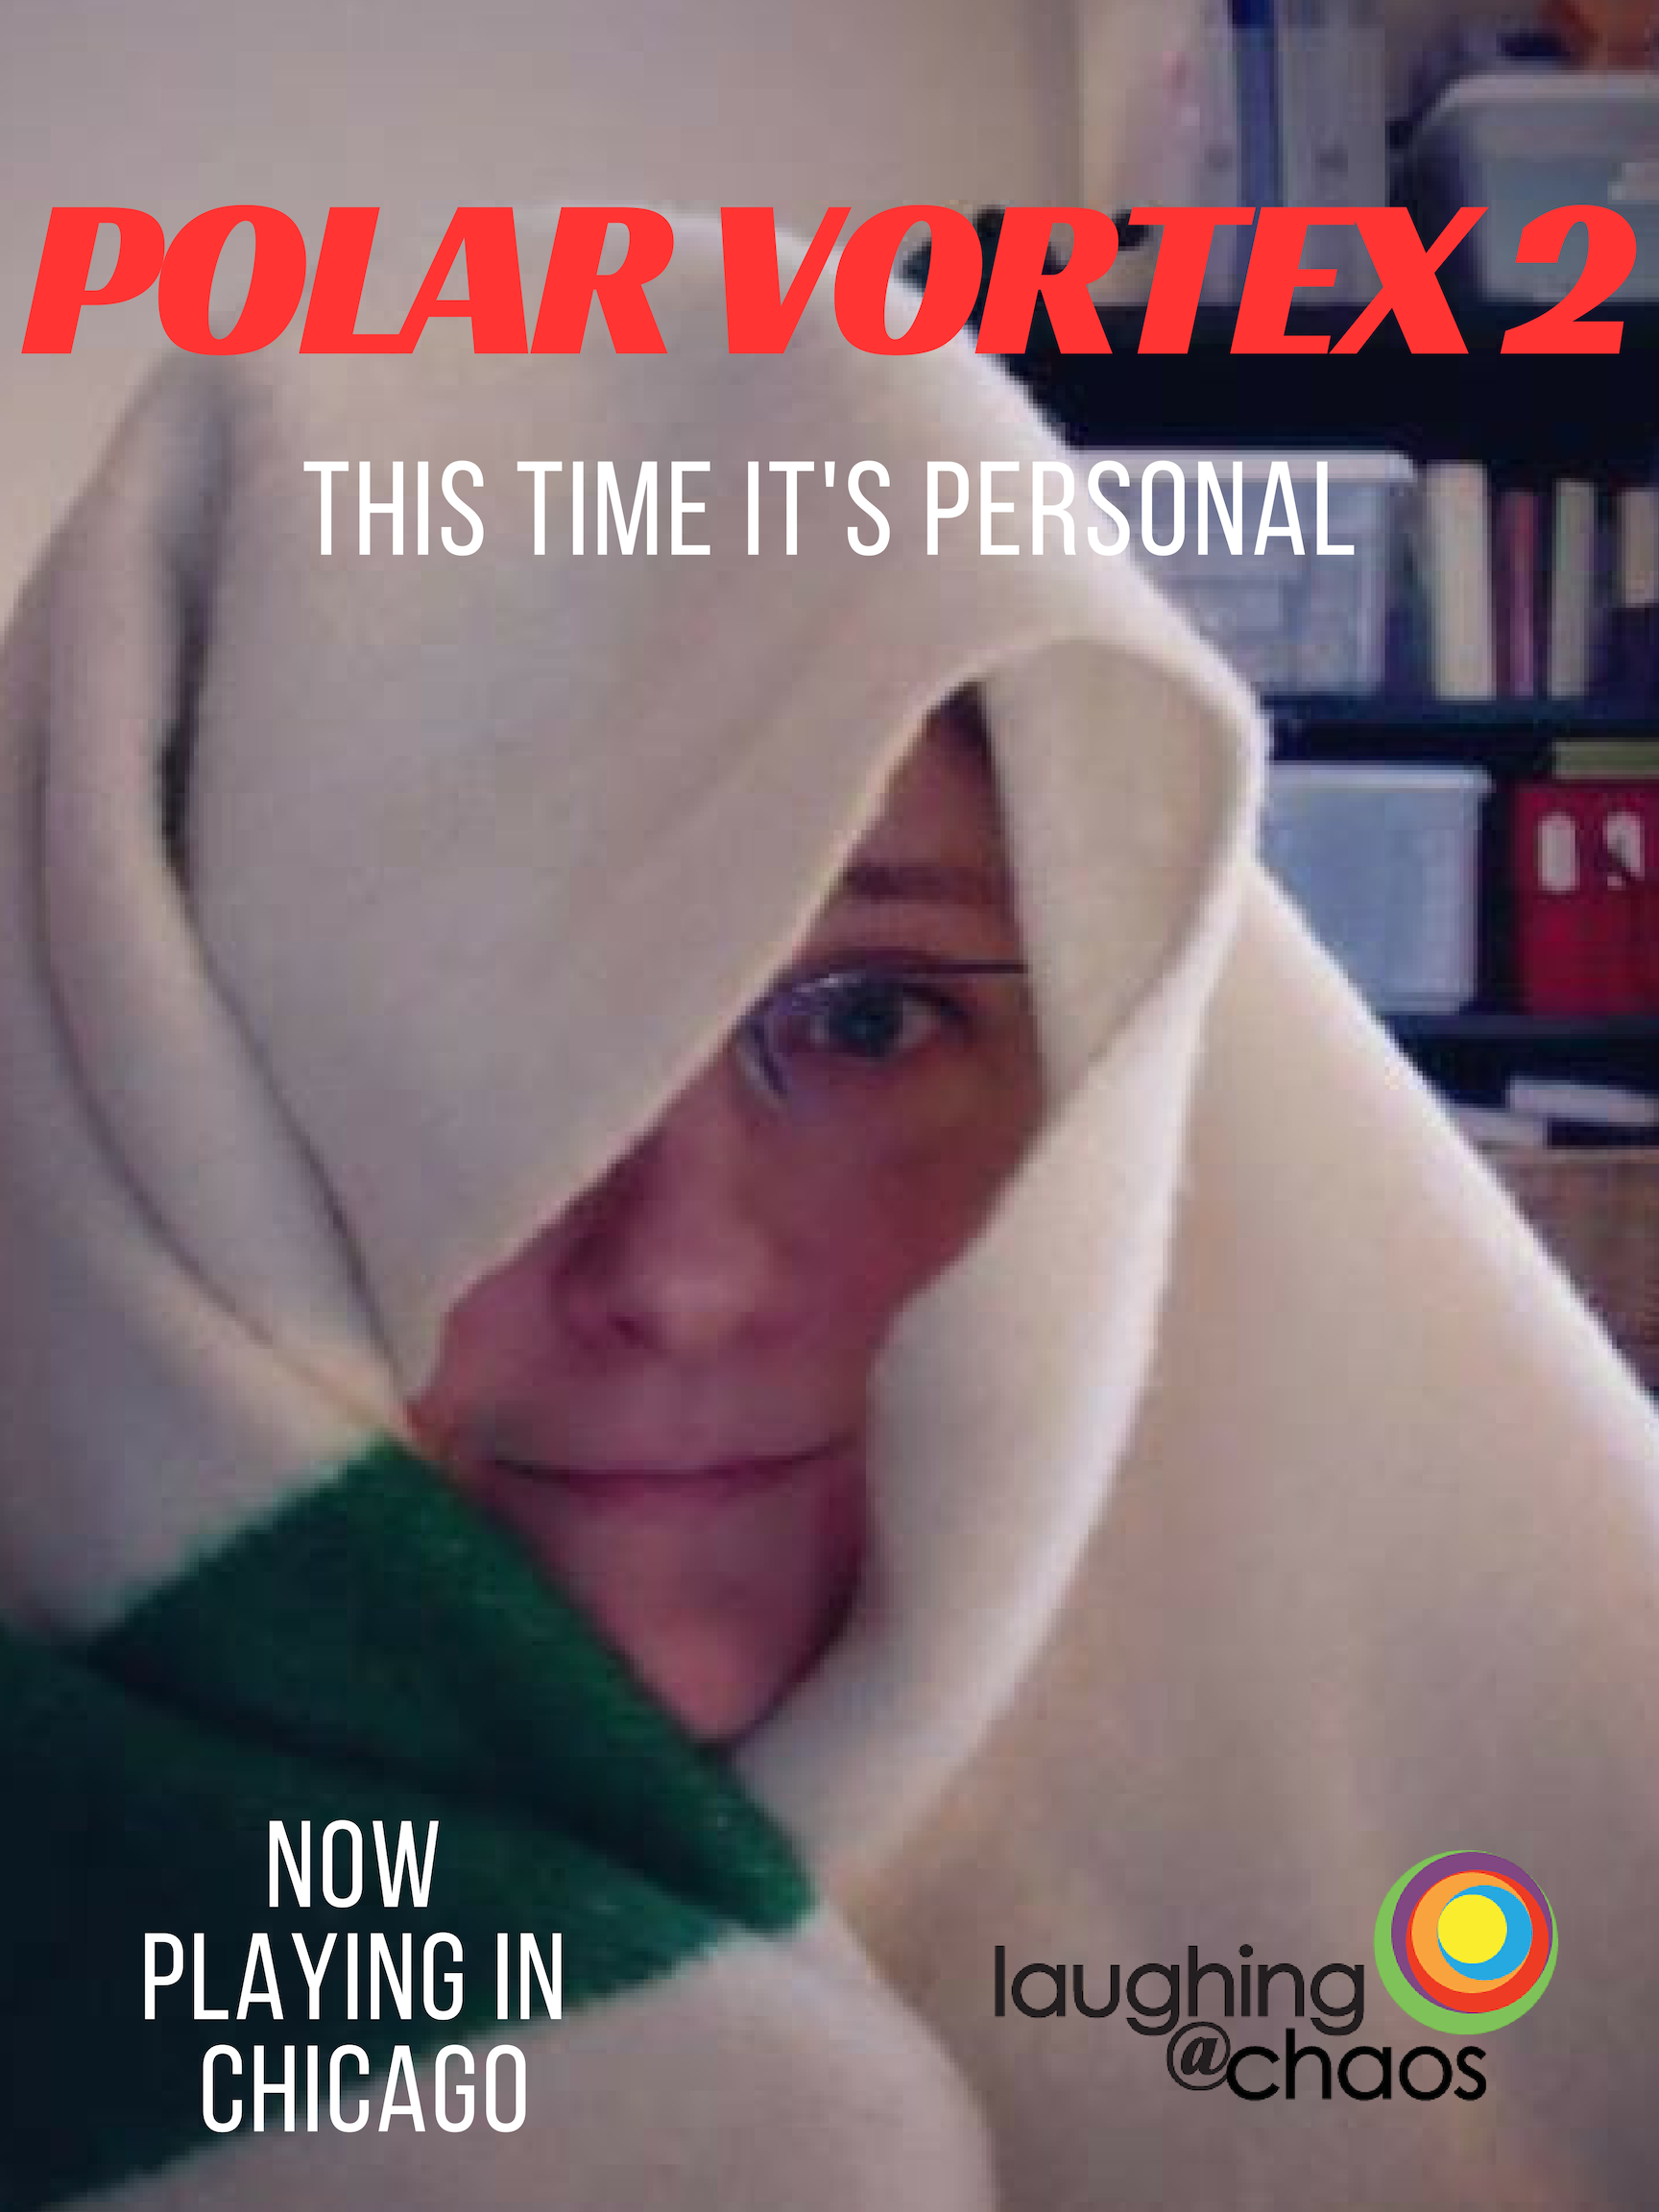 Polar Vortex 2: This Time It’s Personal